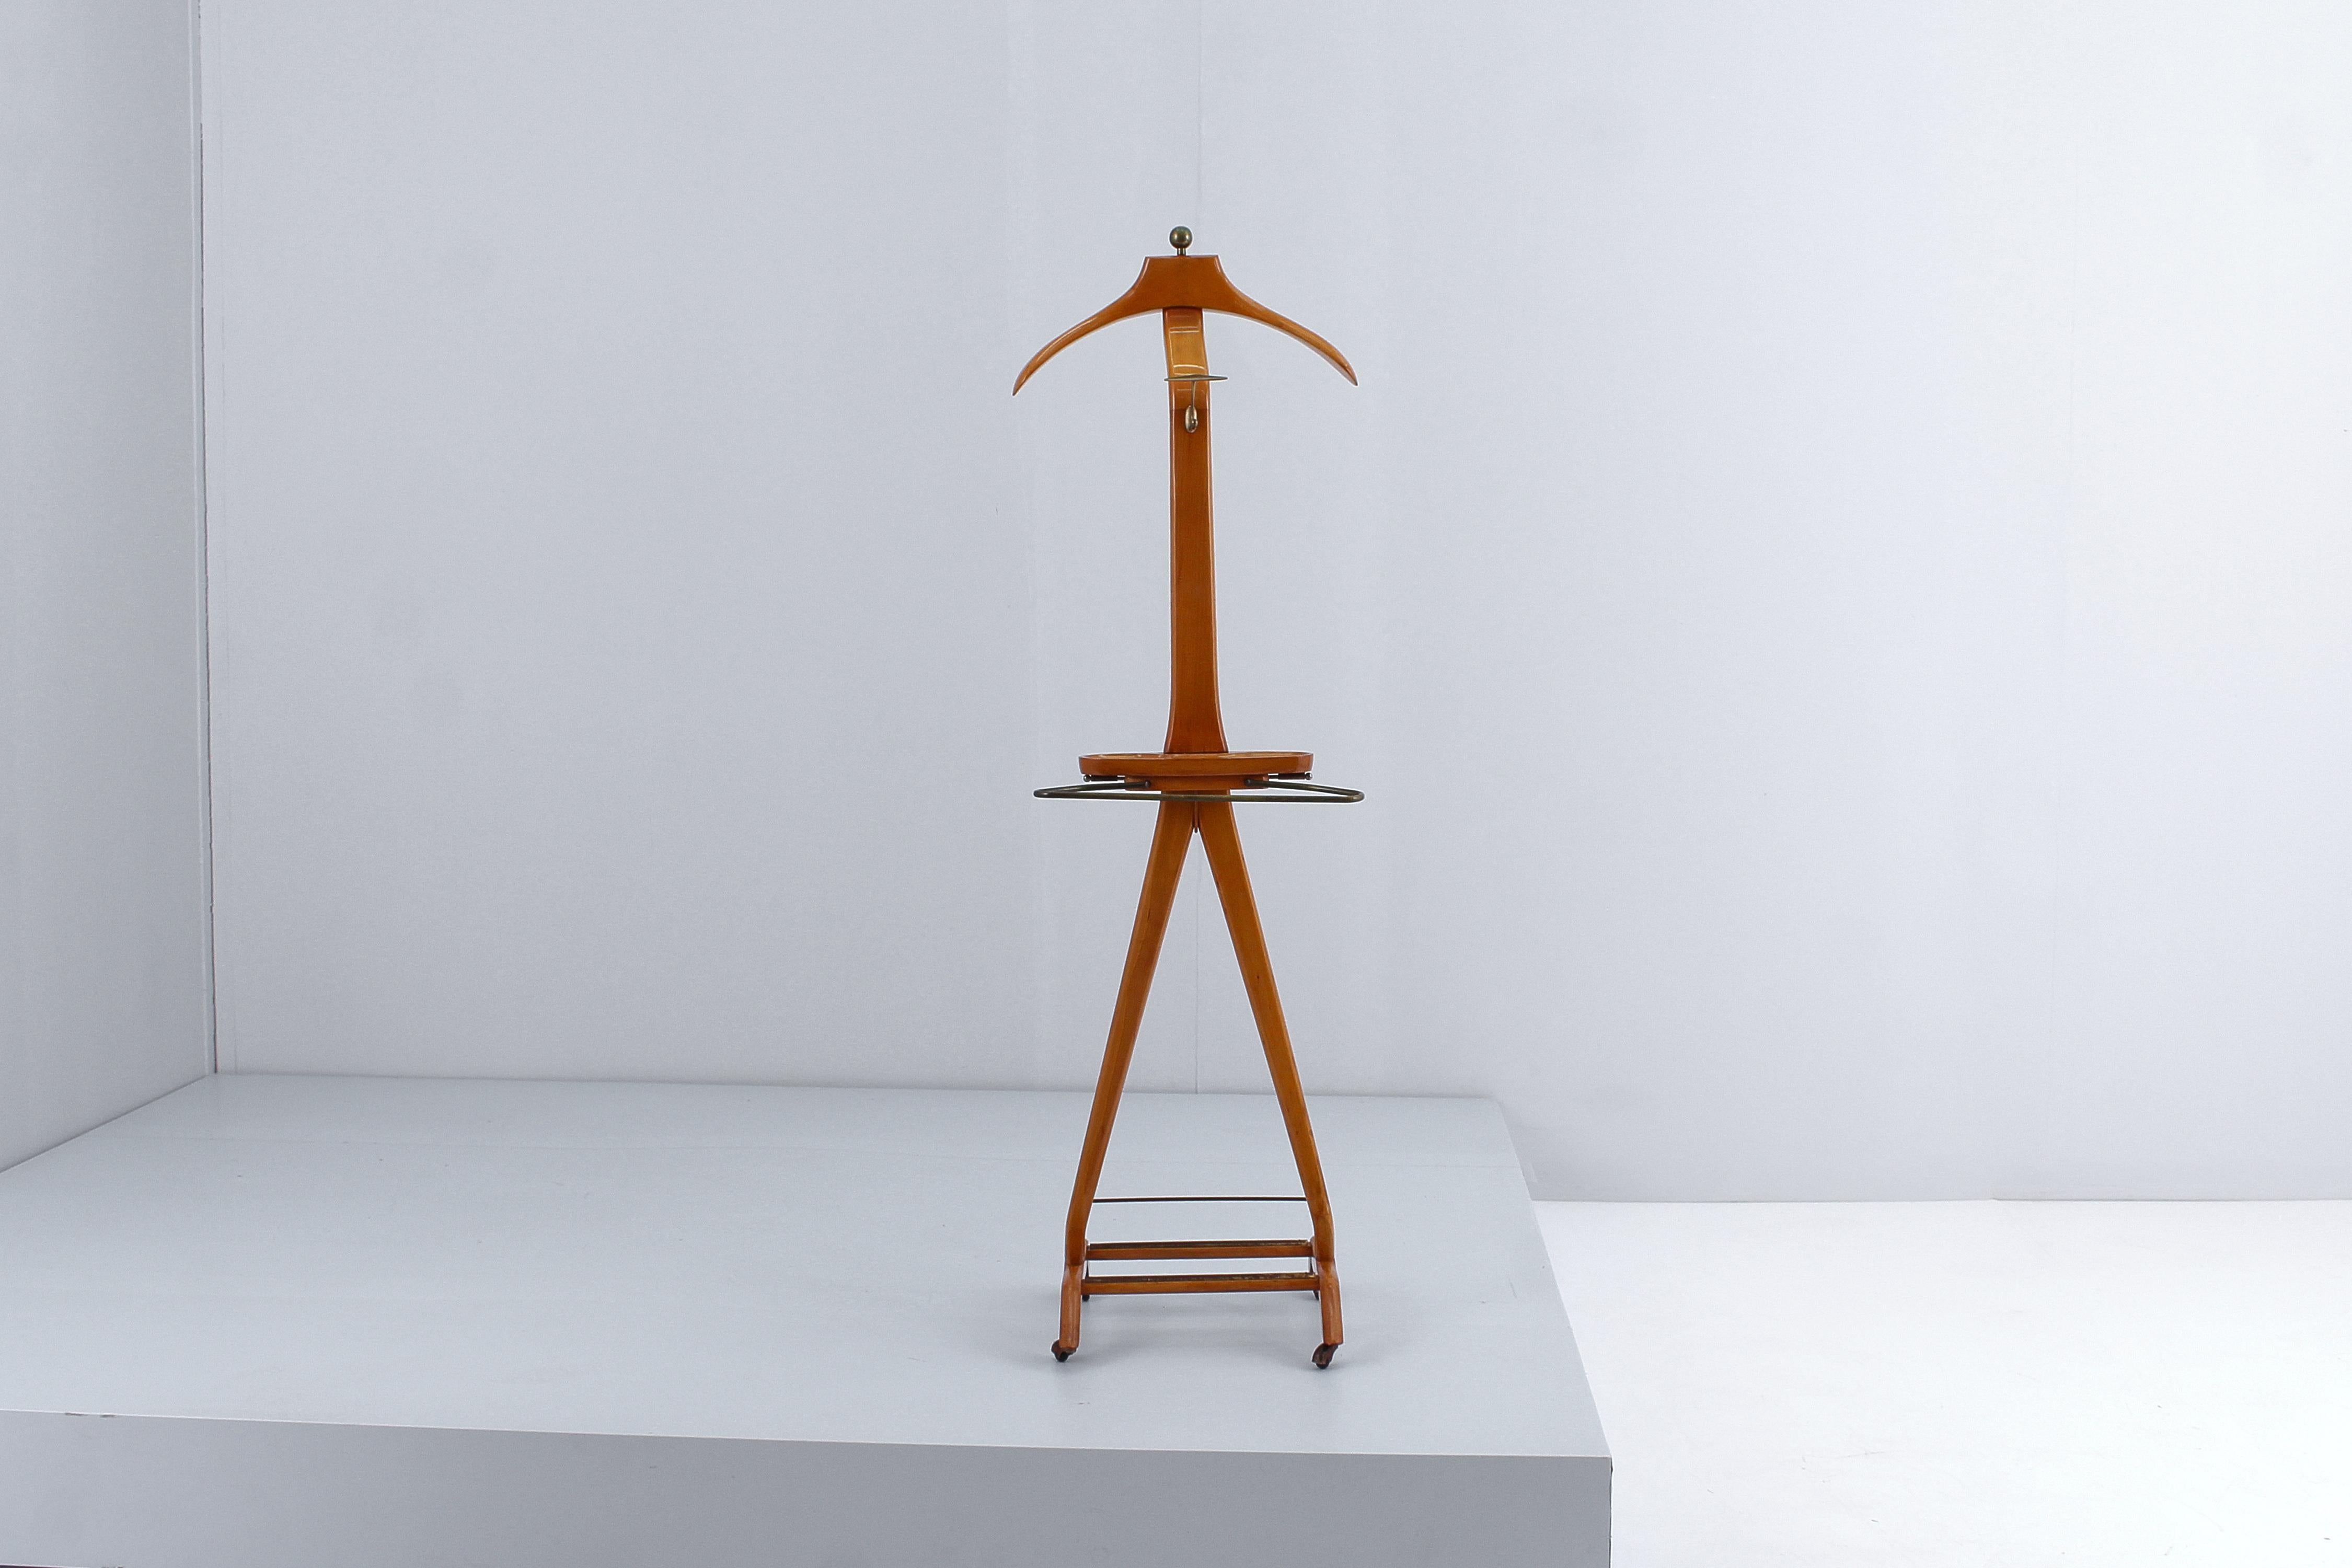 Elegant valet stand with pull-out rods, equipped with jacket and trouser holder, brass hook, shoe rack and a cufflink or jewelery holder, in molded wood. Designed by Ico Parisi for Fratelli Reguitti, Italian manifacture in 60s. Restored. Hot stamped